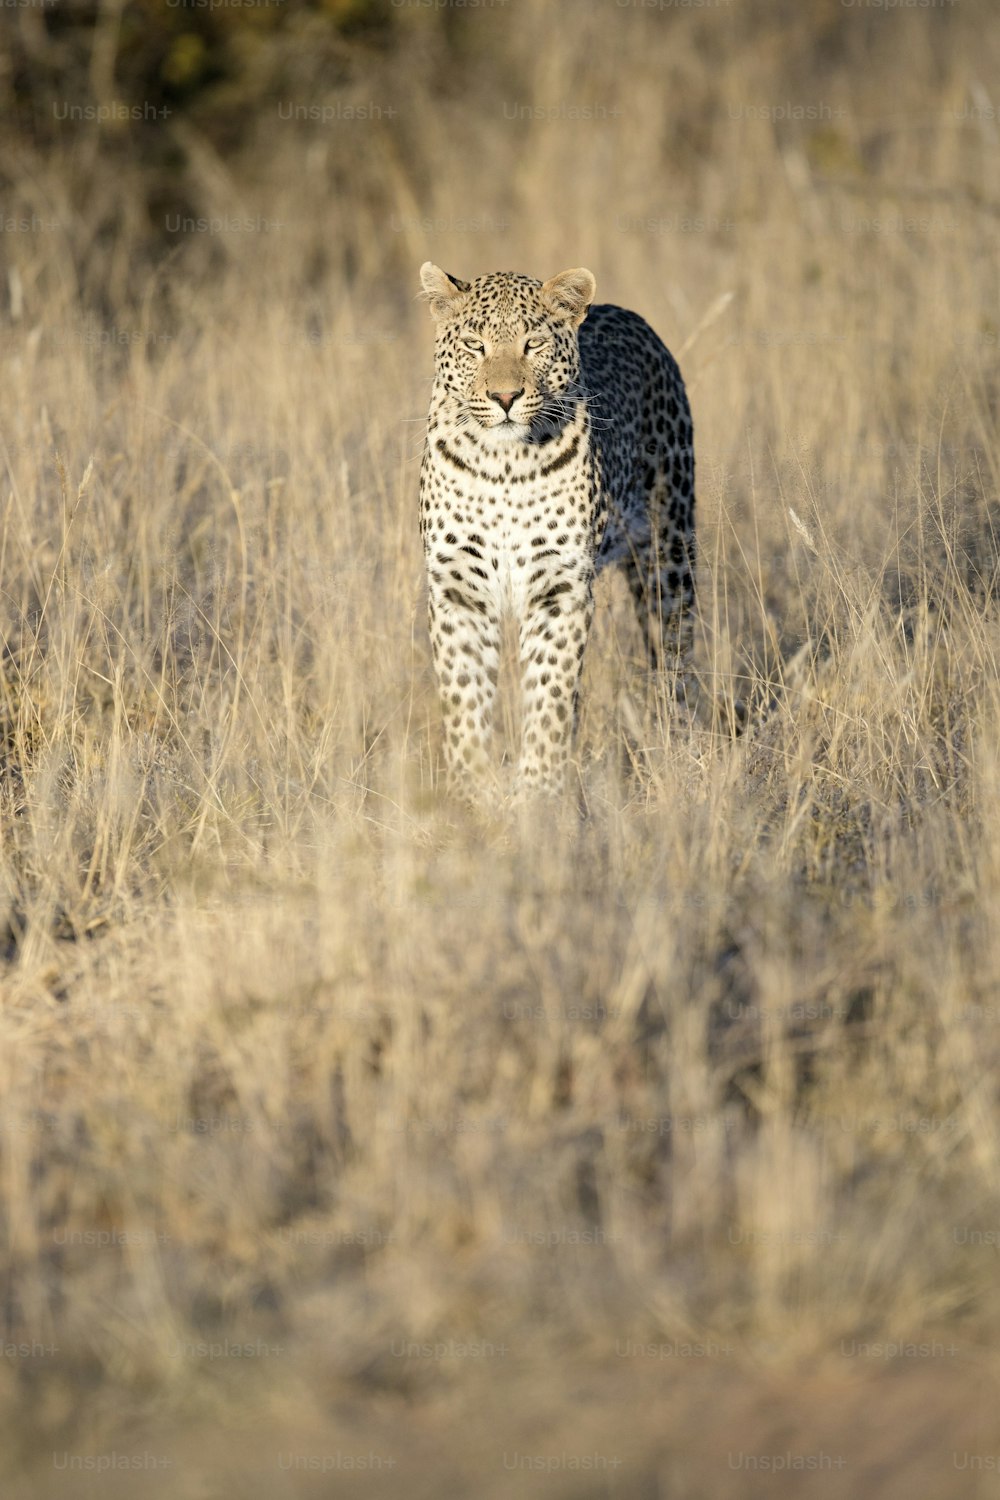 Leopard in the grass of Etosha National Park, Namibia.